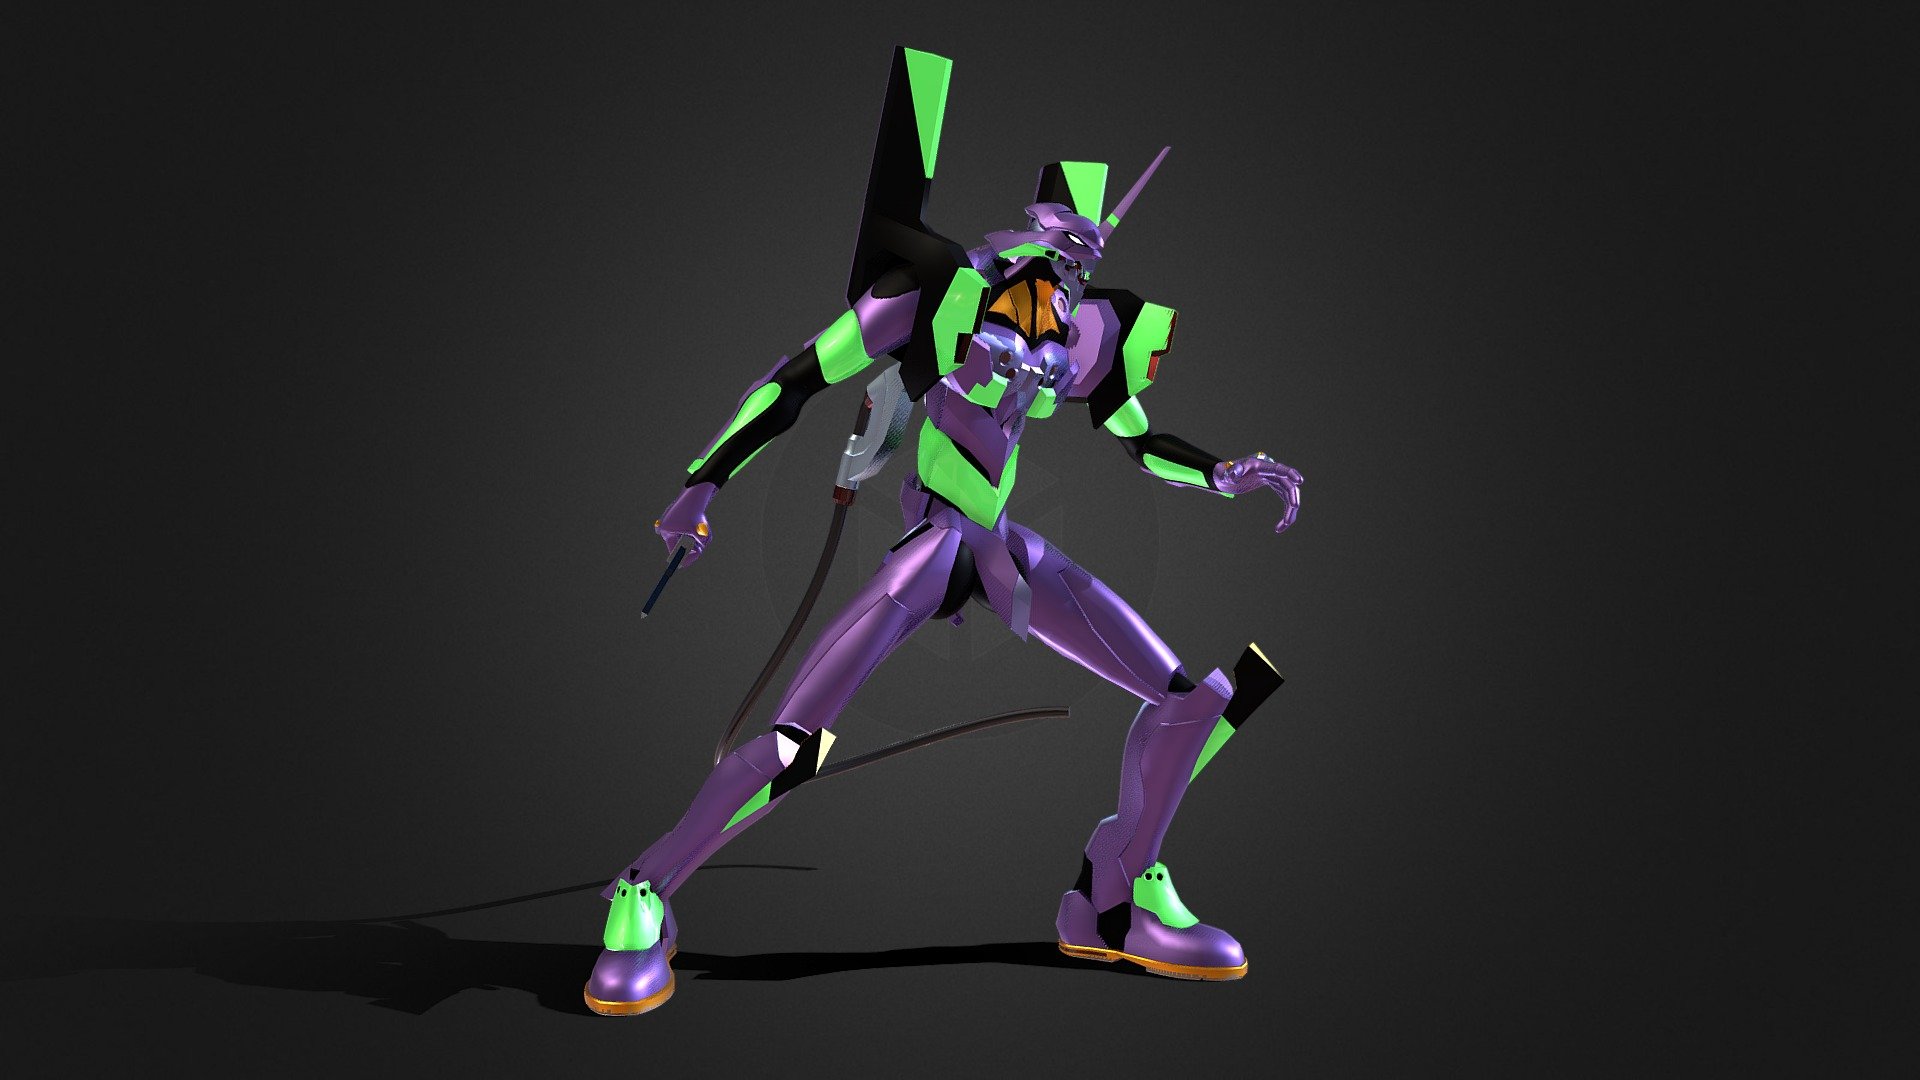 If you’re interested in purchasing any of my models, contact me @ andrewdisaacs@yahoo.com

Evangelion Unit 01 as seen from the anime Neon Genesis Evangelion.

Made in 3DS Max by myself 3d model